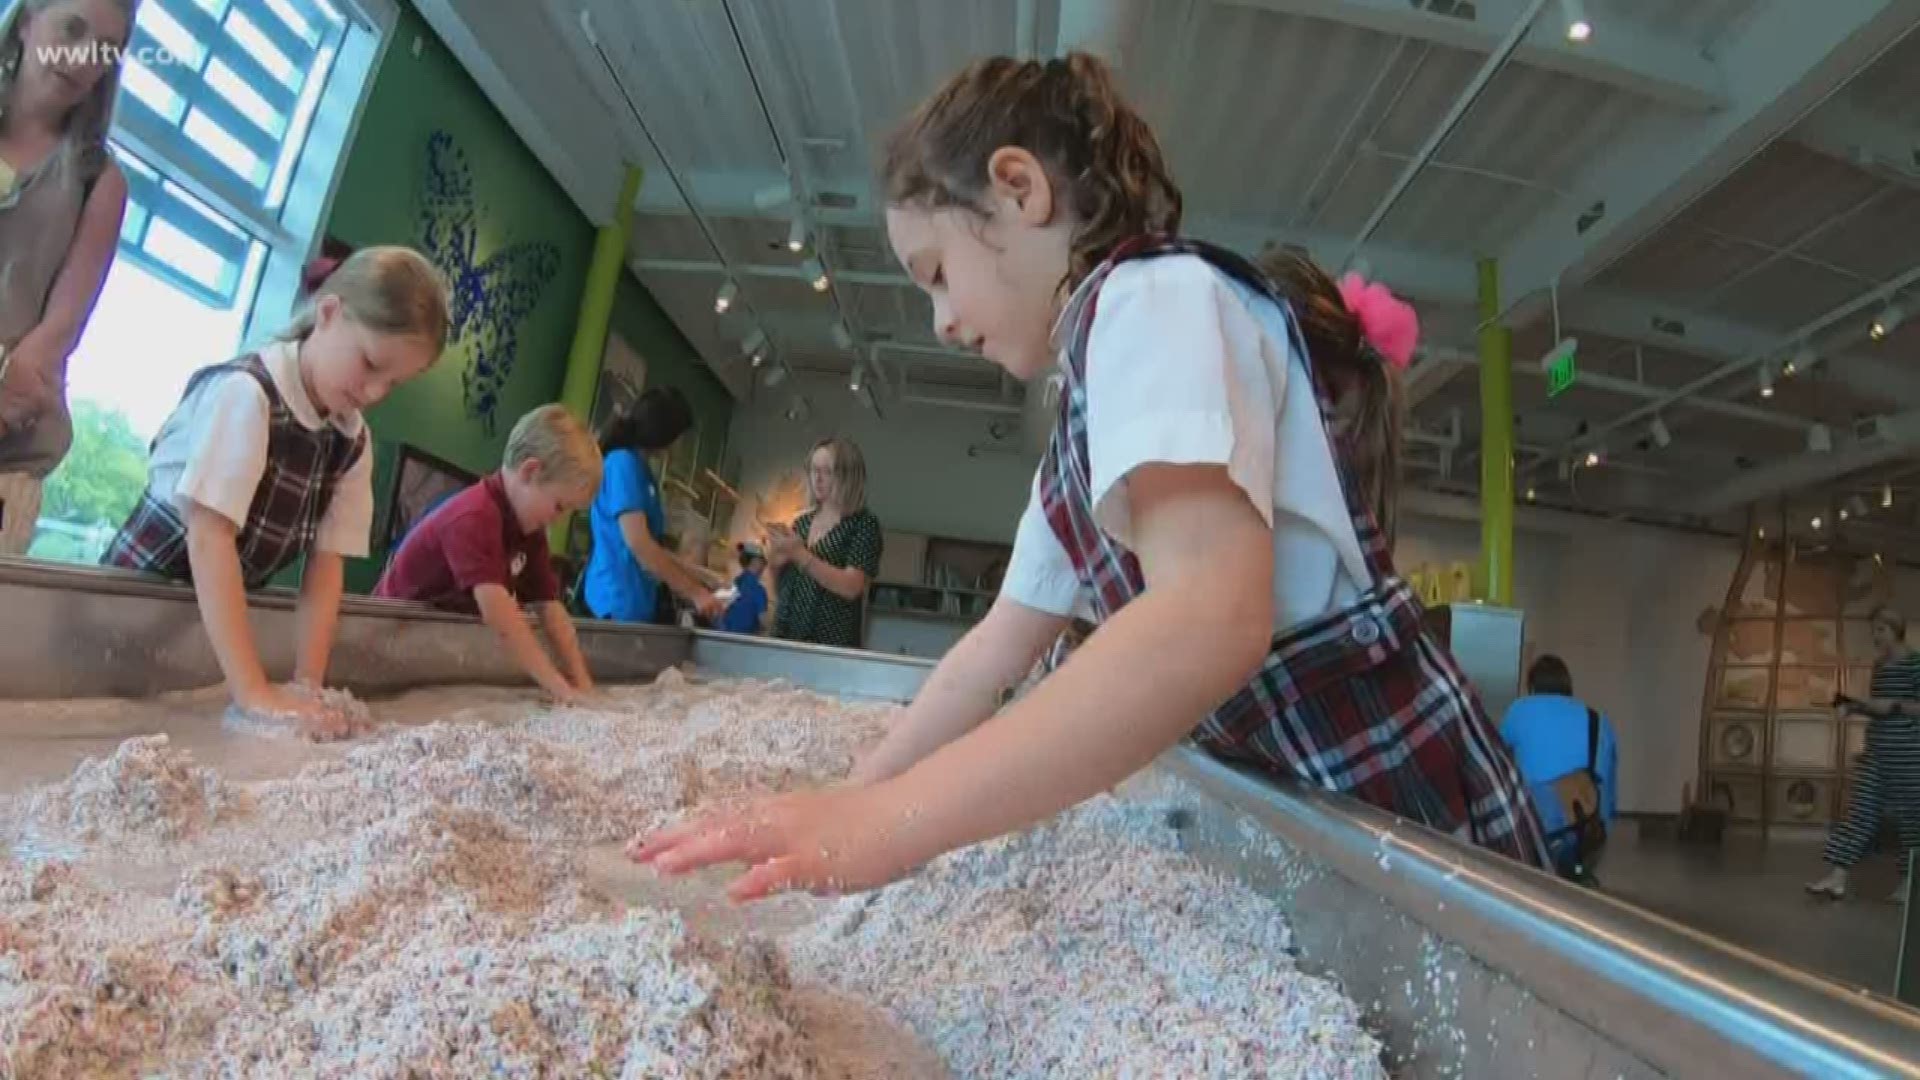 Louisiana Children's Museum set to reopen this weekend